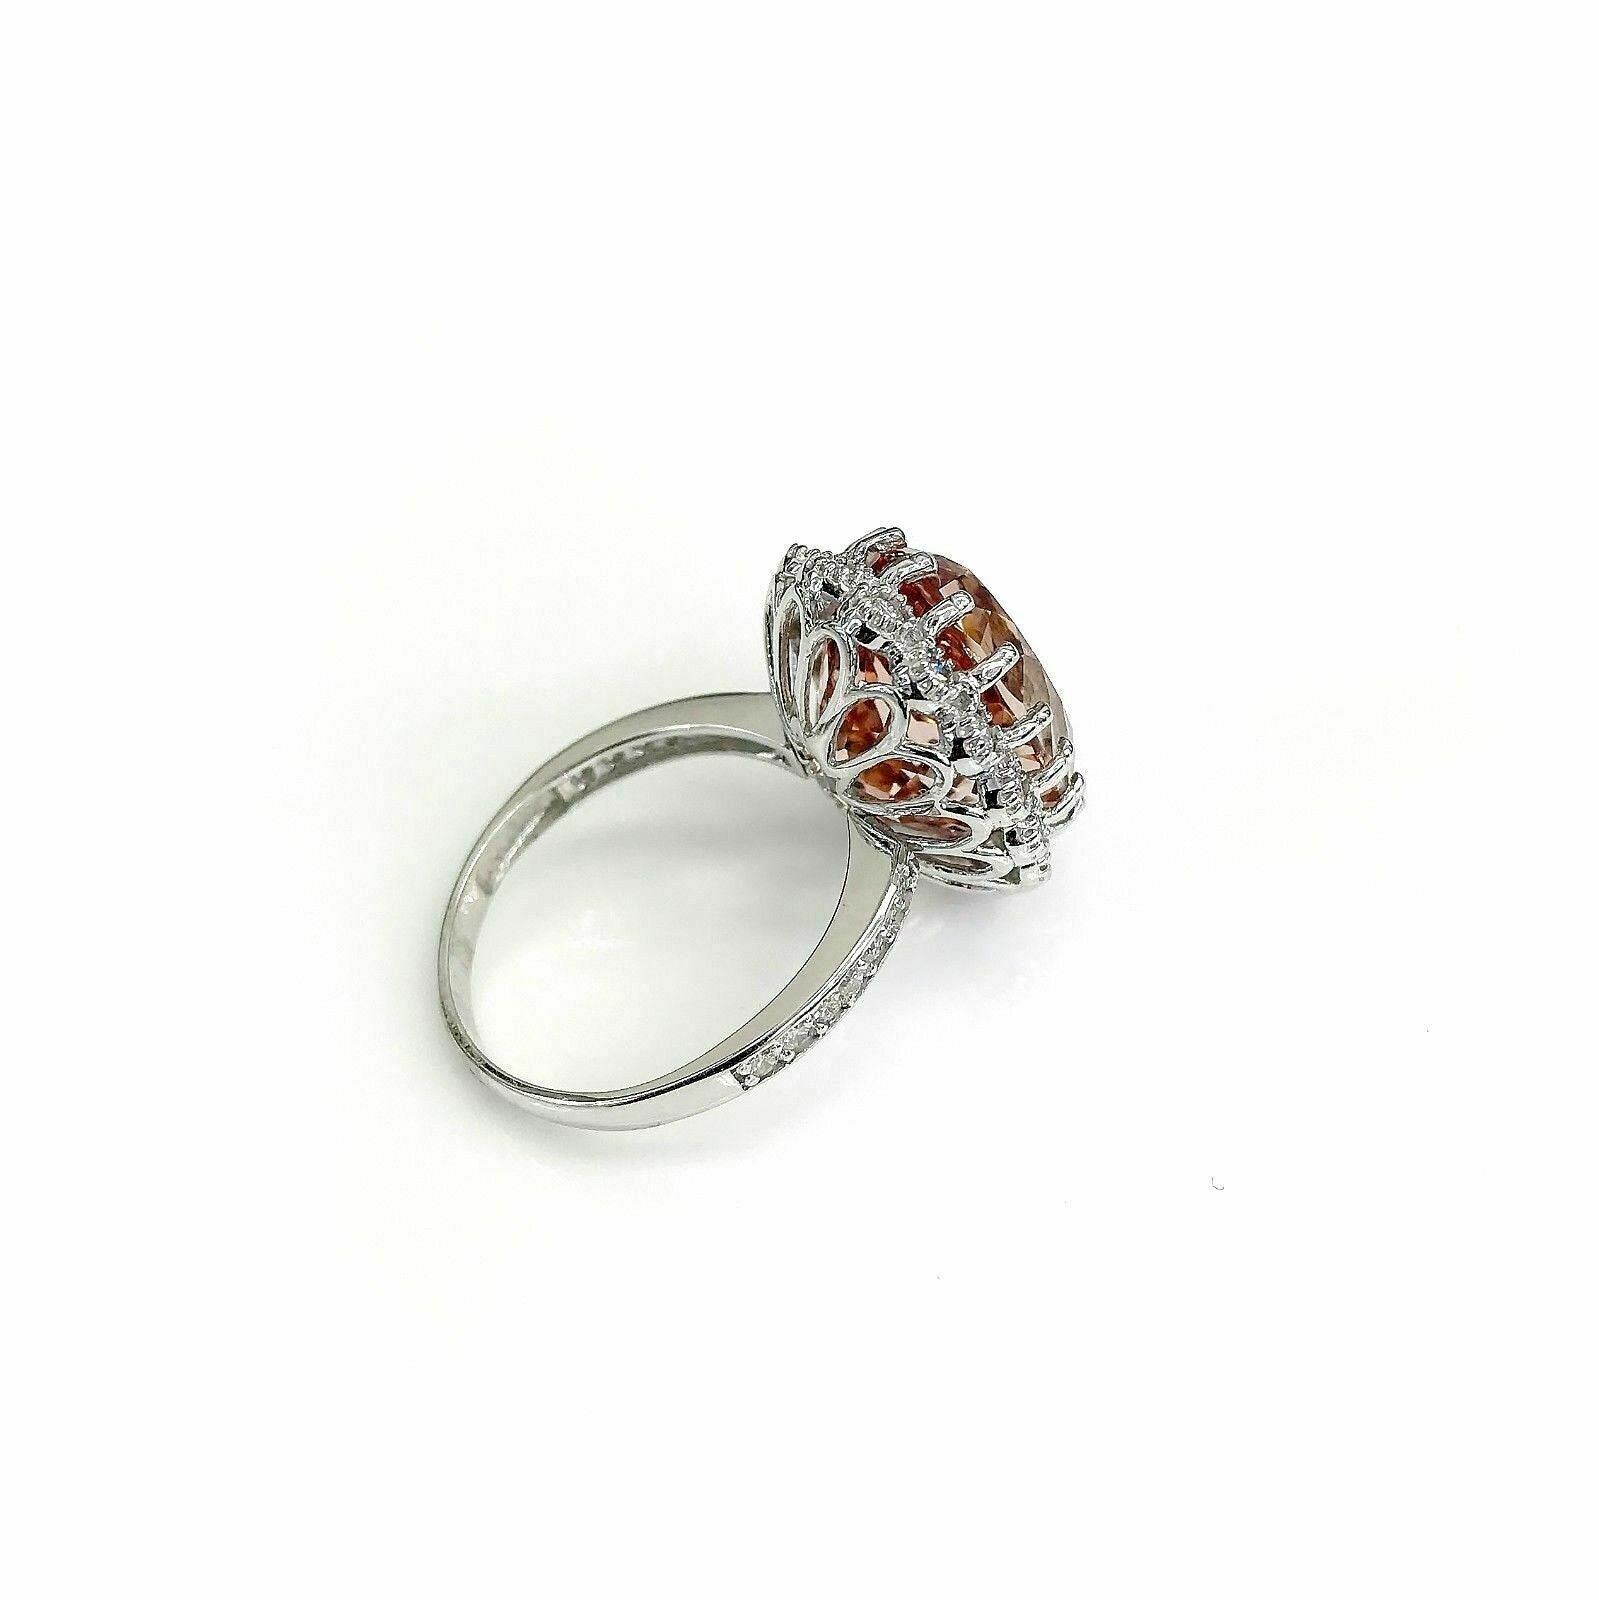 12.29 Carats Diamond and Oval Morganite Halo Cocktail Ring 14K White Gold New